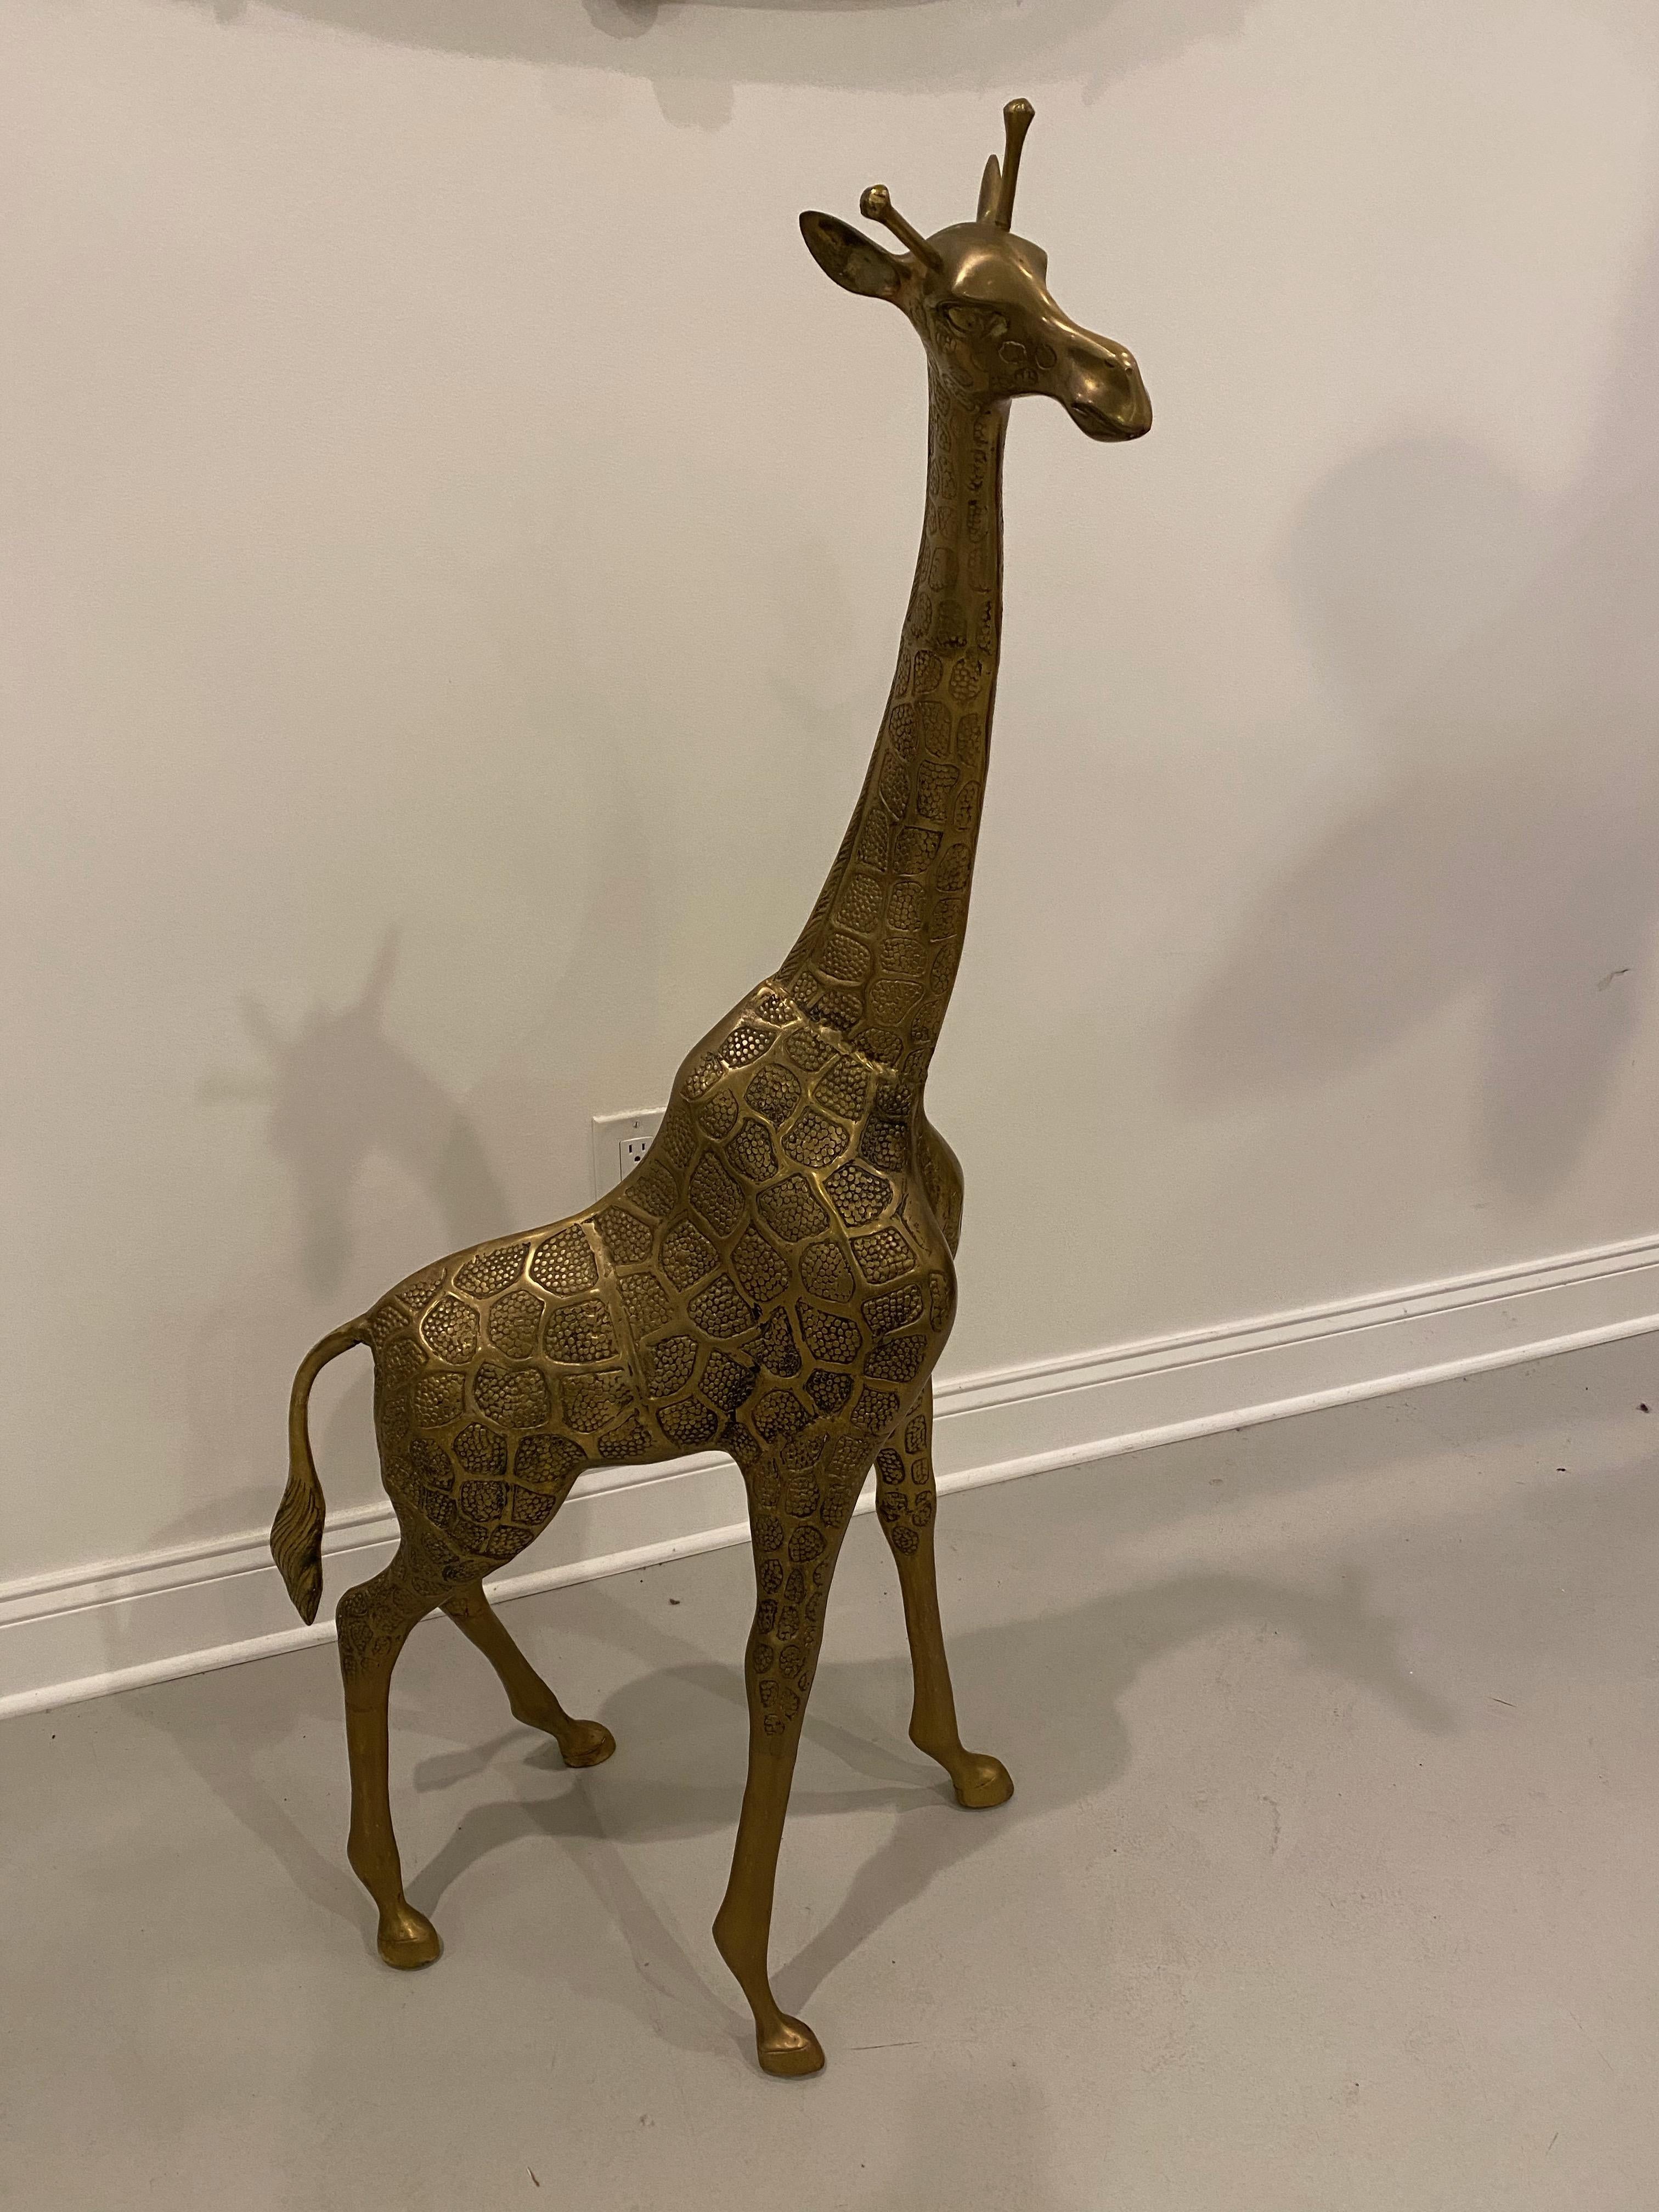 Midcentury standing metal giraffe with beautiful details throughout. Some signs of oxidation. Please look through all images. Measures: 52 inches.